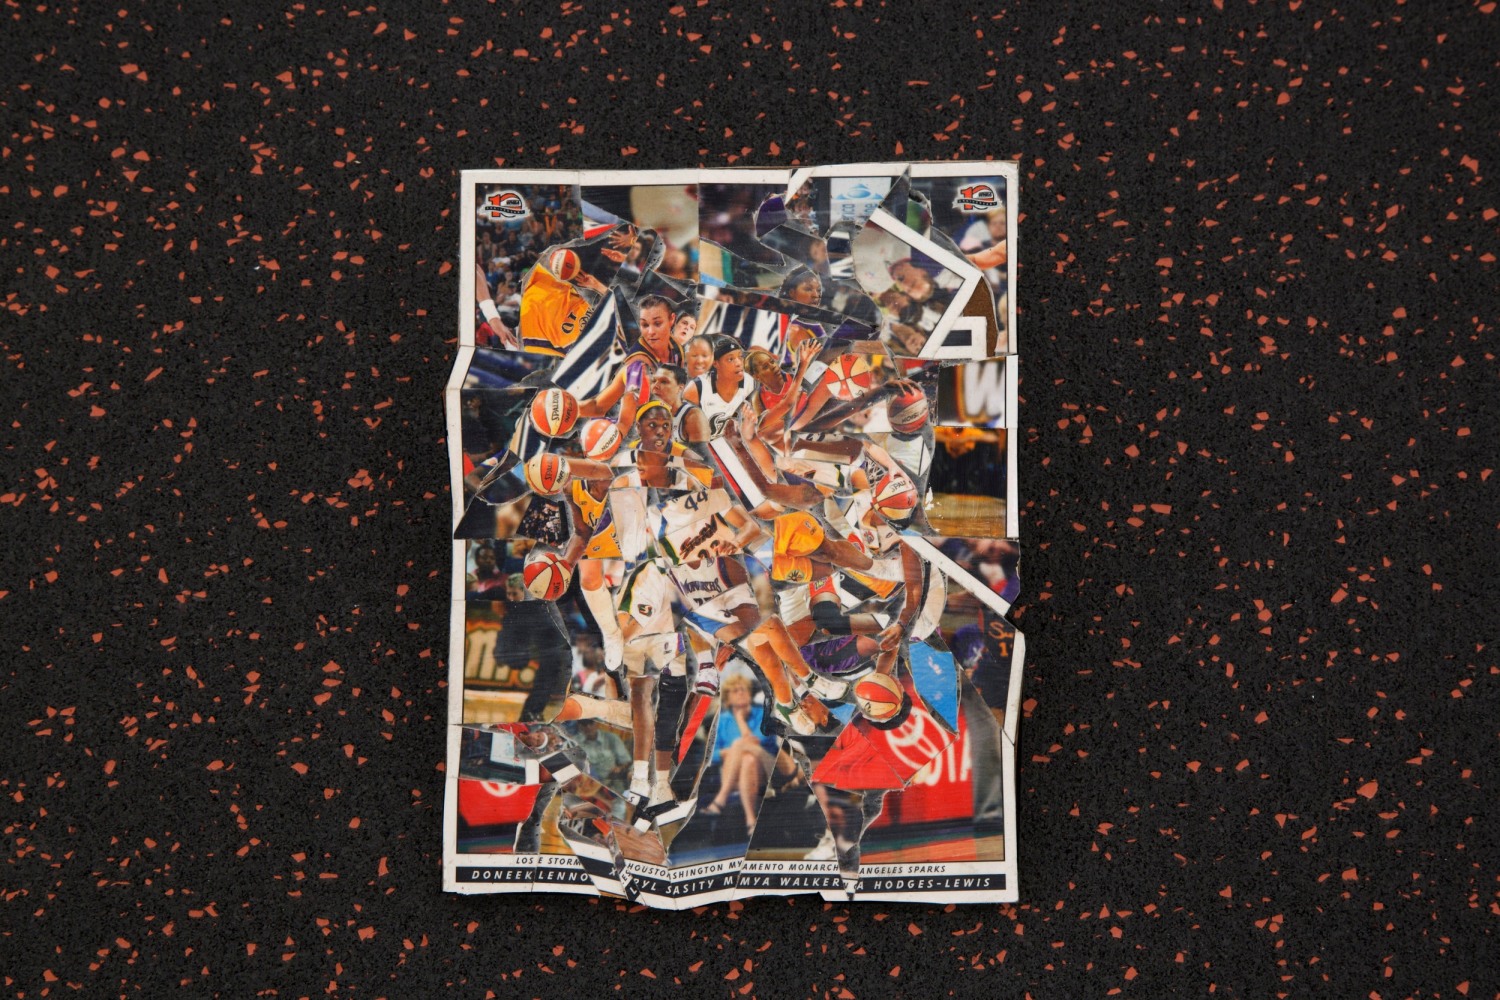 Ashley Teamer
Delivurt, 2016
Collaged WNBA Trading Cards
8 x 10 inches
Courtesy of the Artist and Fort Gansevoort